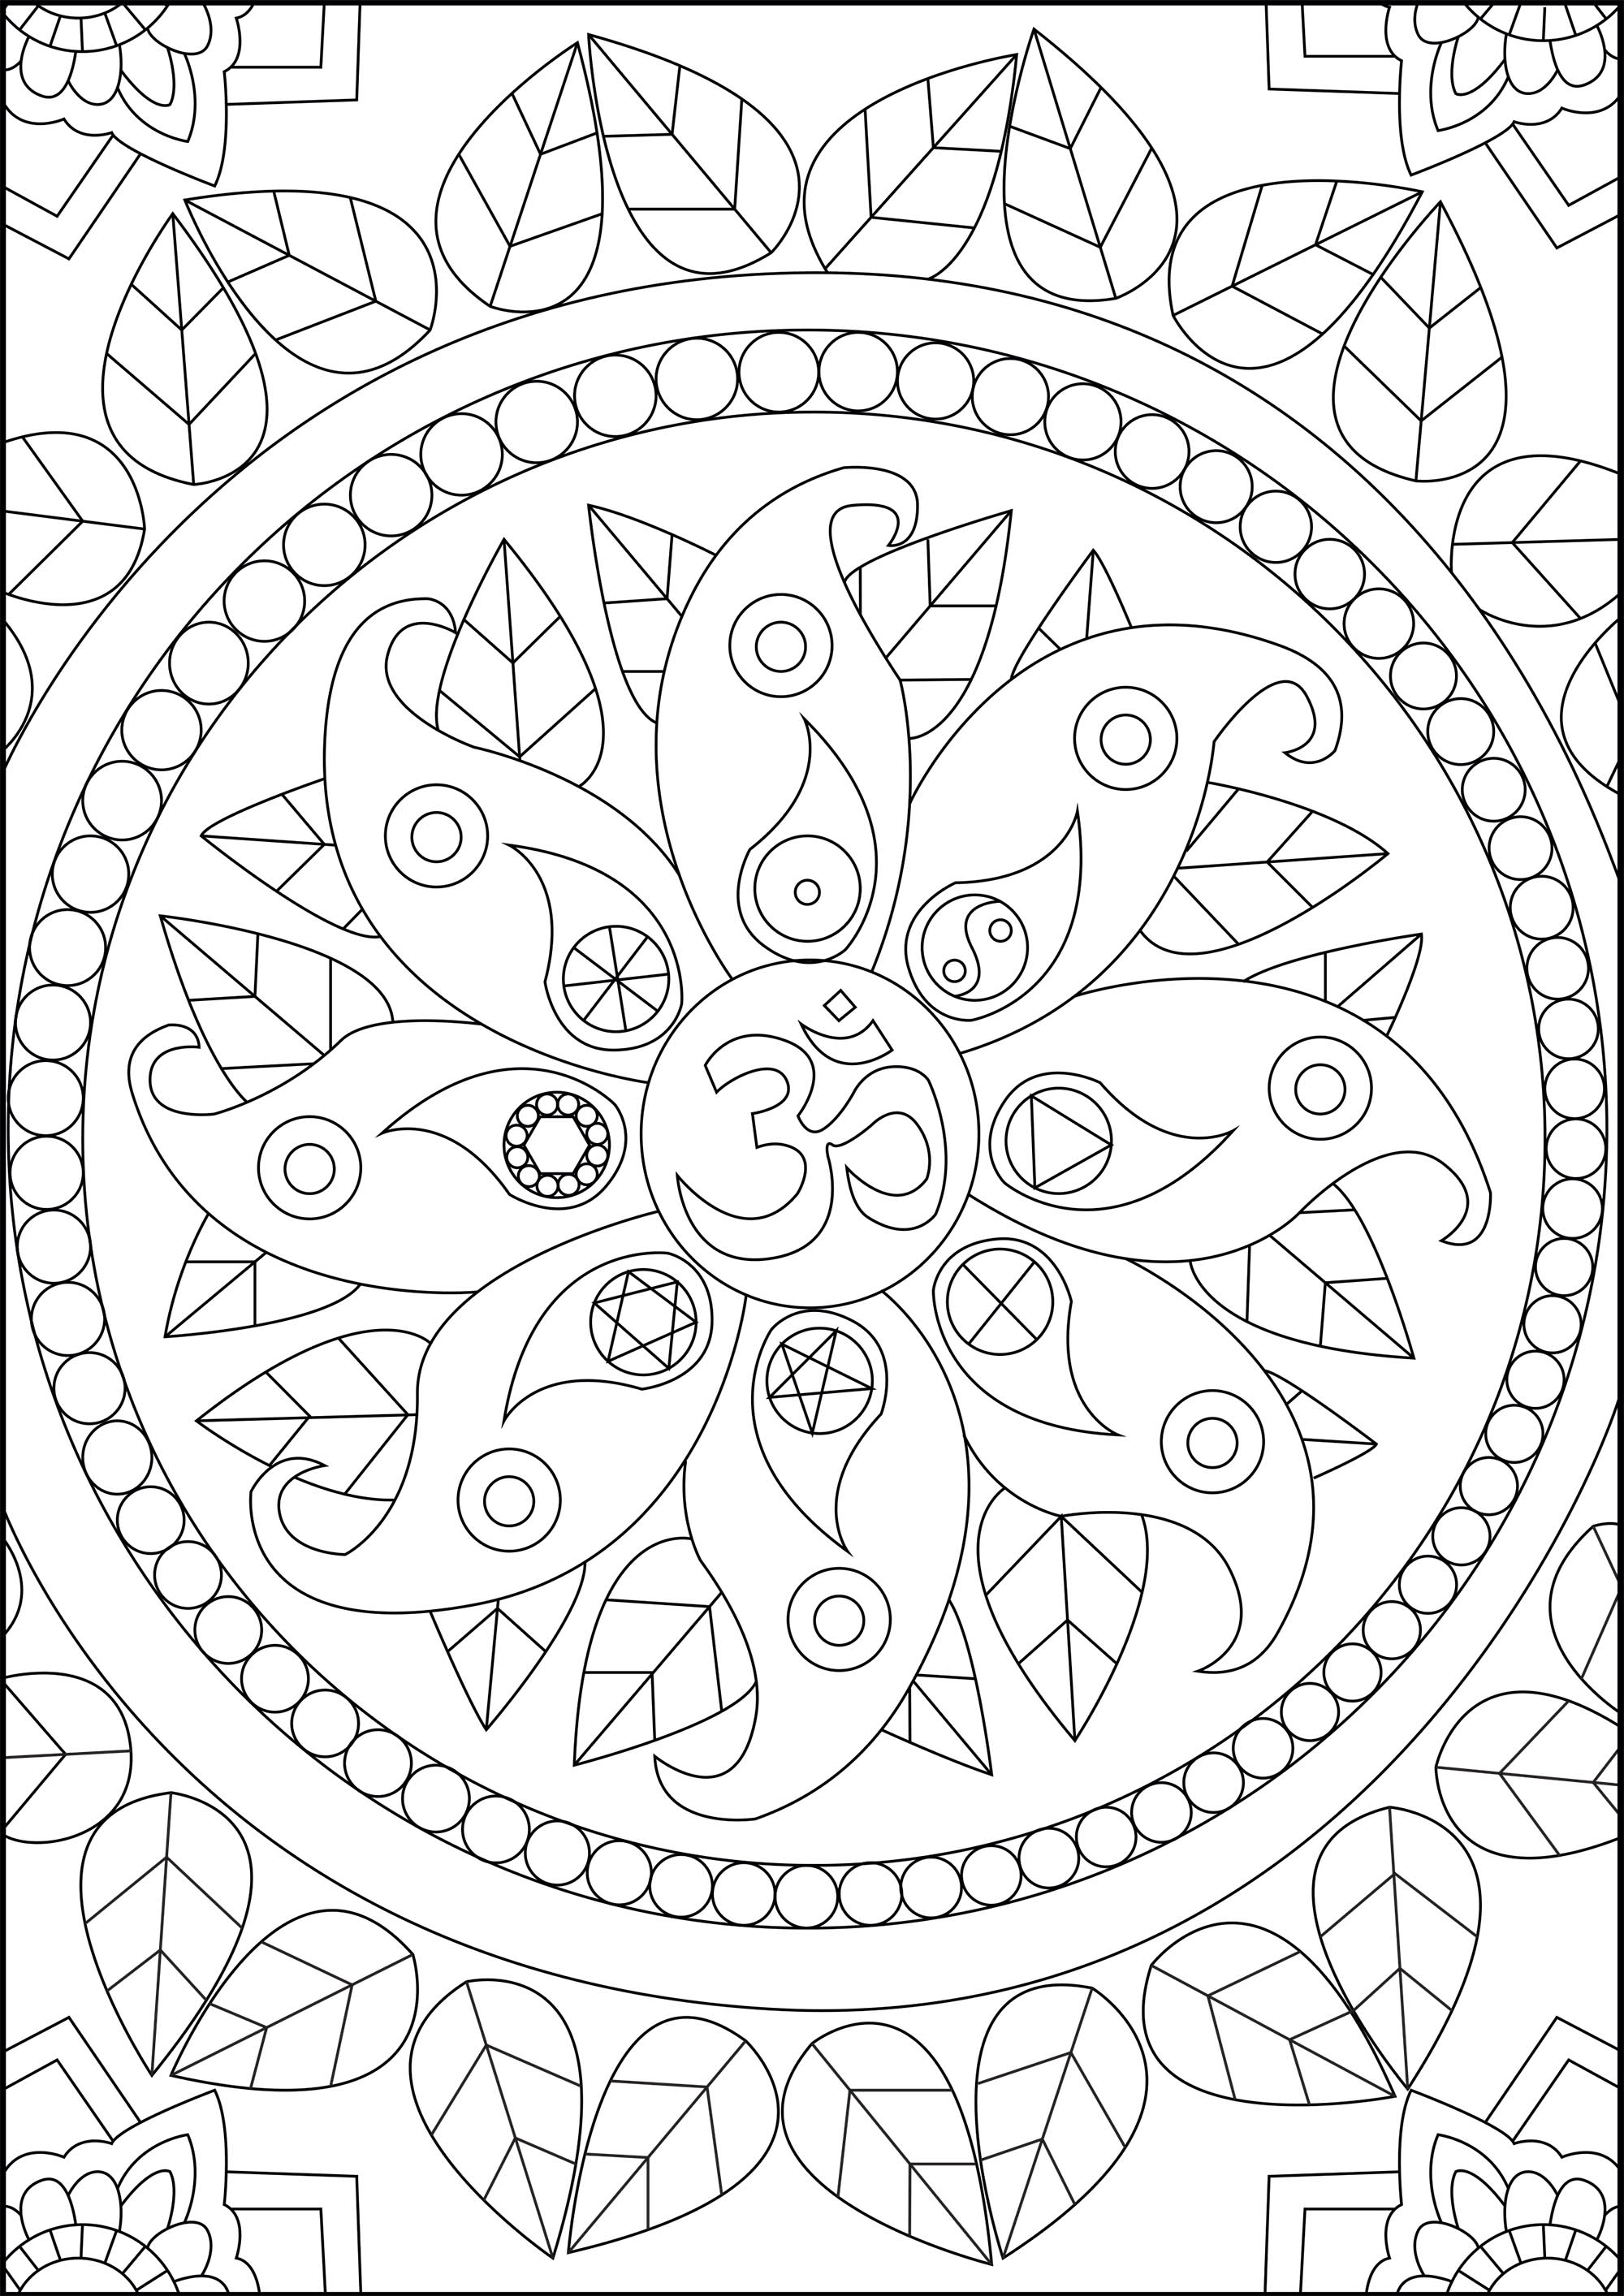 Find inner peace with this coloring page featuring various Zen symbols, including the 'Om'. 'Om' is a sacred sound and a spiritual symbol in Hinduism, that signifies the essence of the ultimate reality, consciousness or Atman. It is a syllable that is chanted either independently or before a mantra in Hinduism, Buddhism, and Jainism, Artist : Caillou